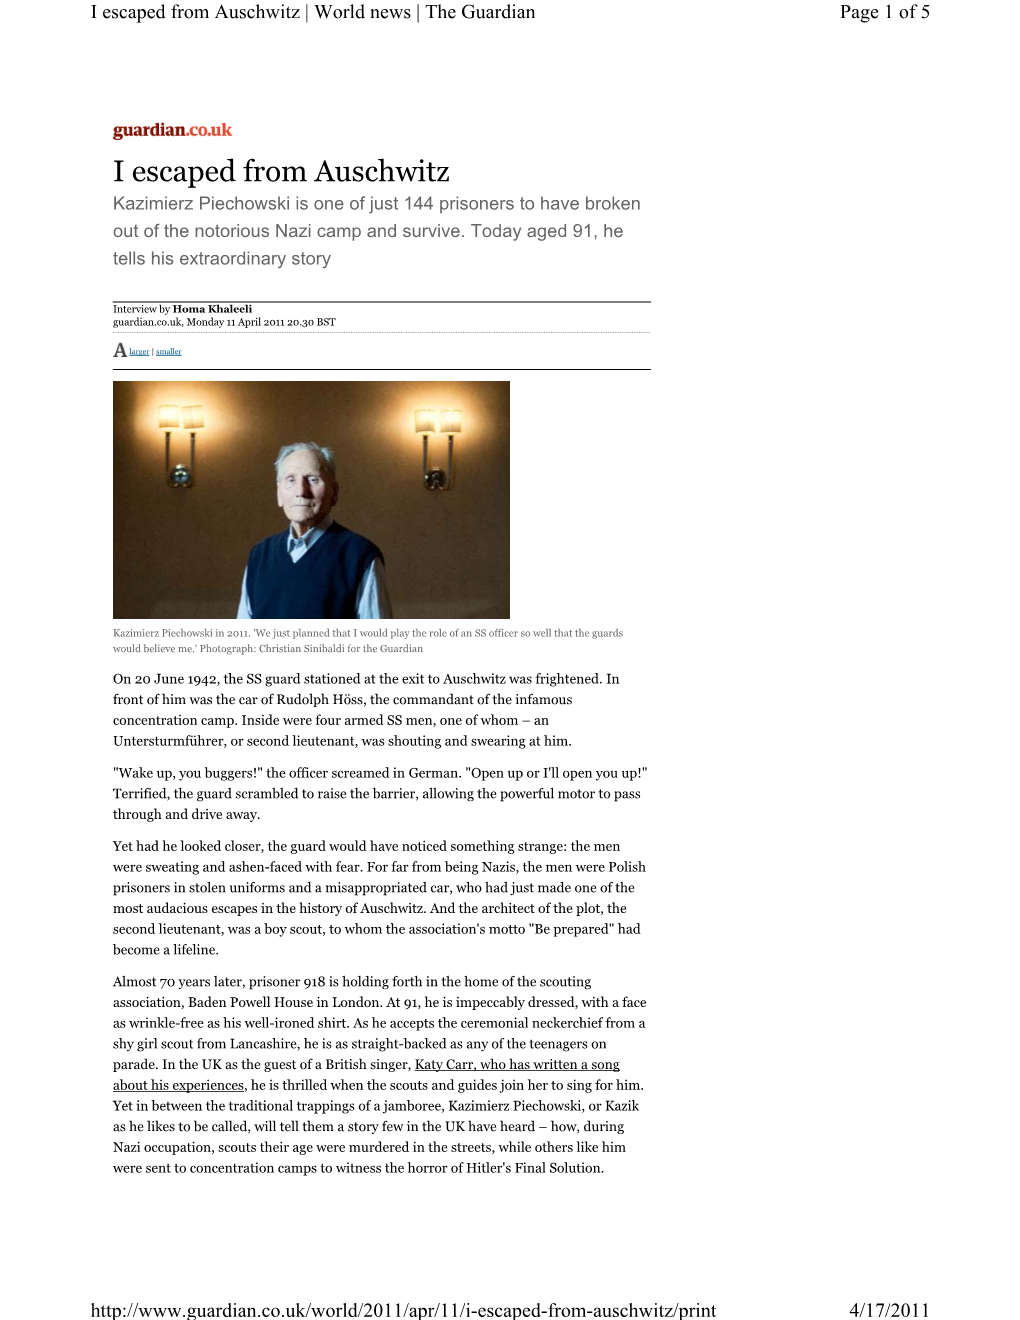 I Escaped from Auschwitz | World News | the Guardian Page 1 of 5